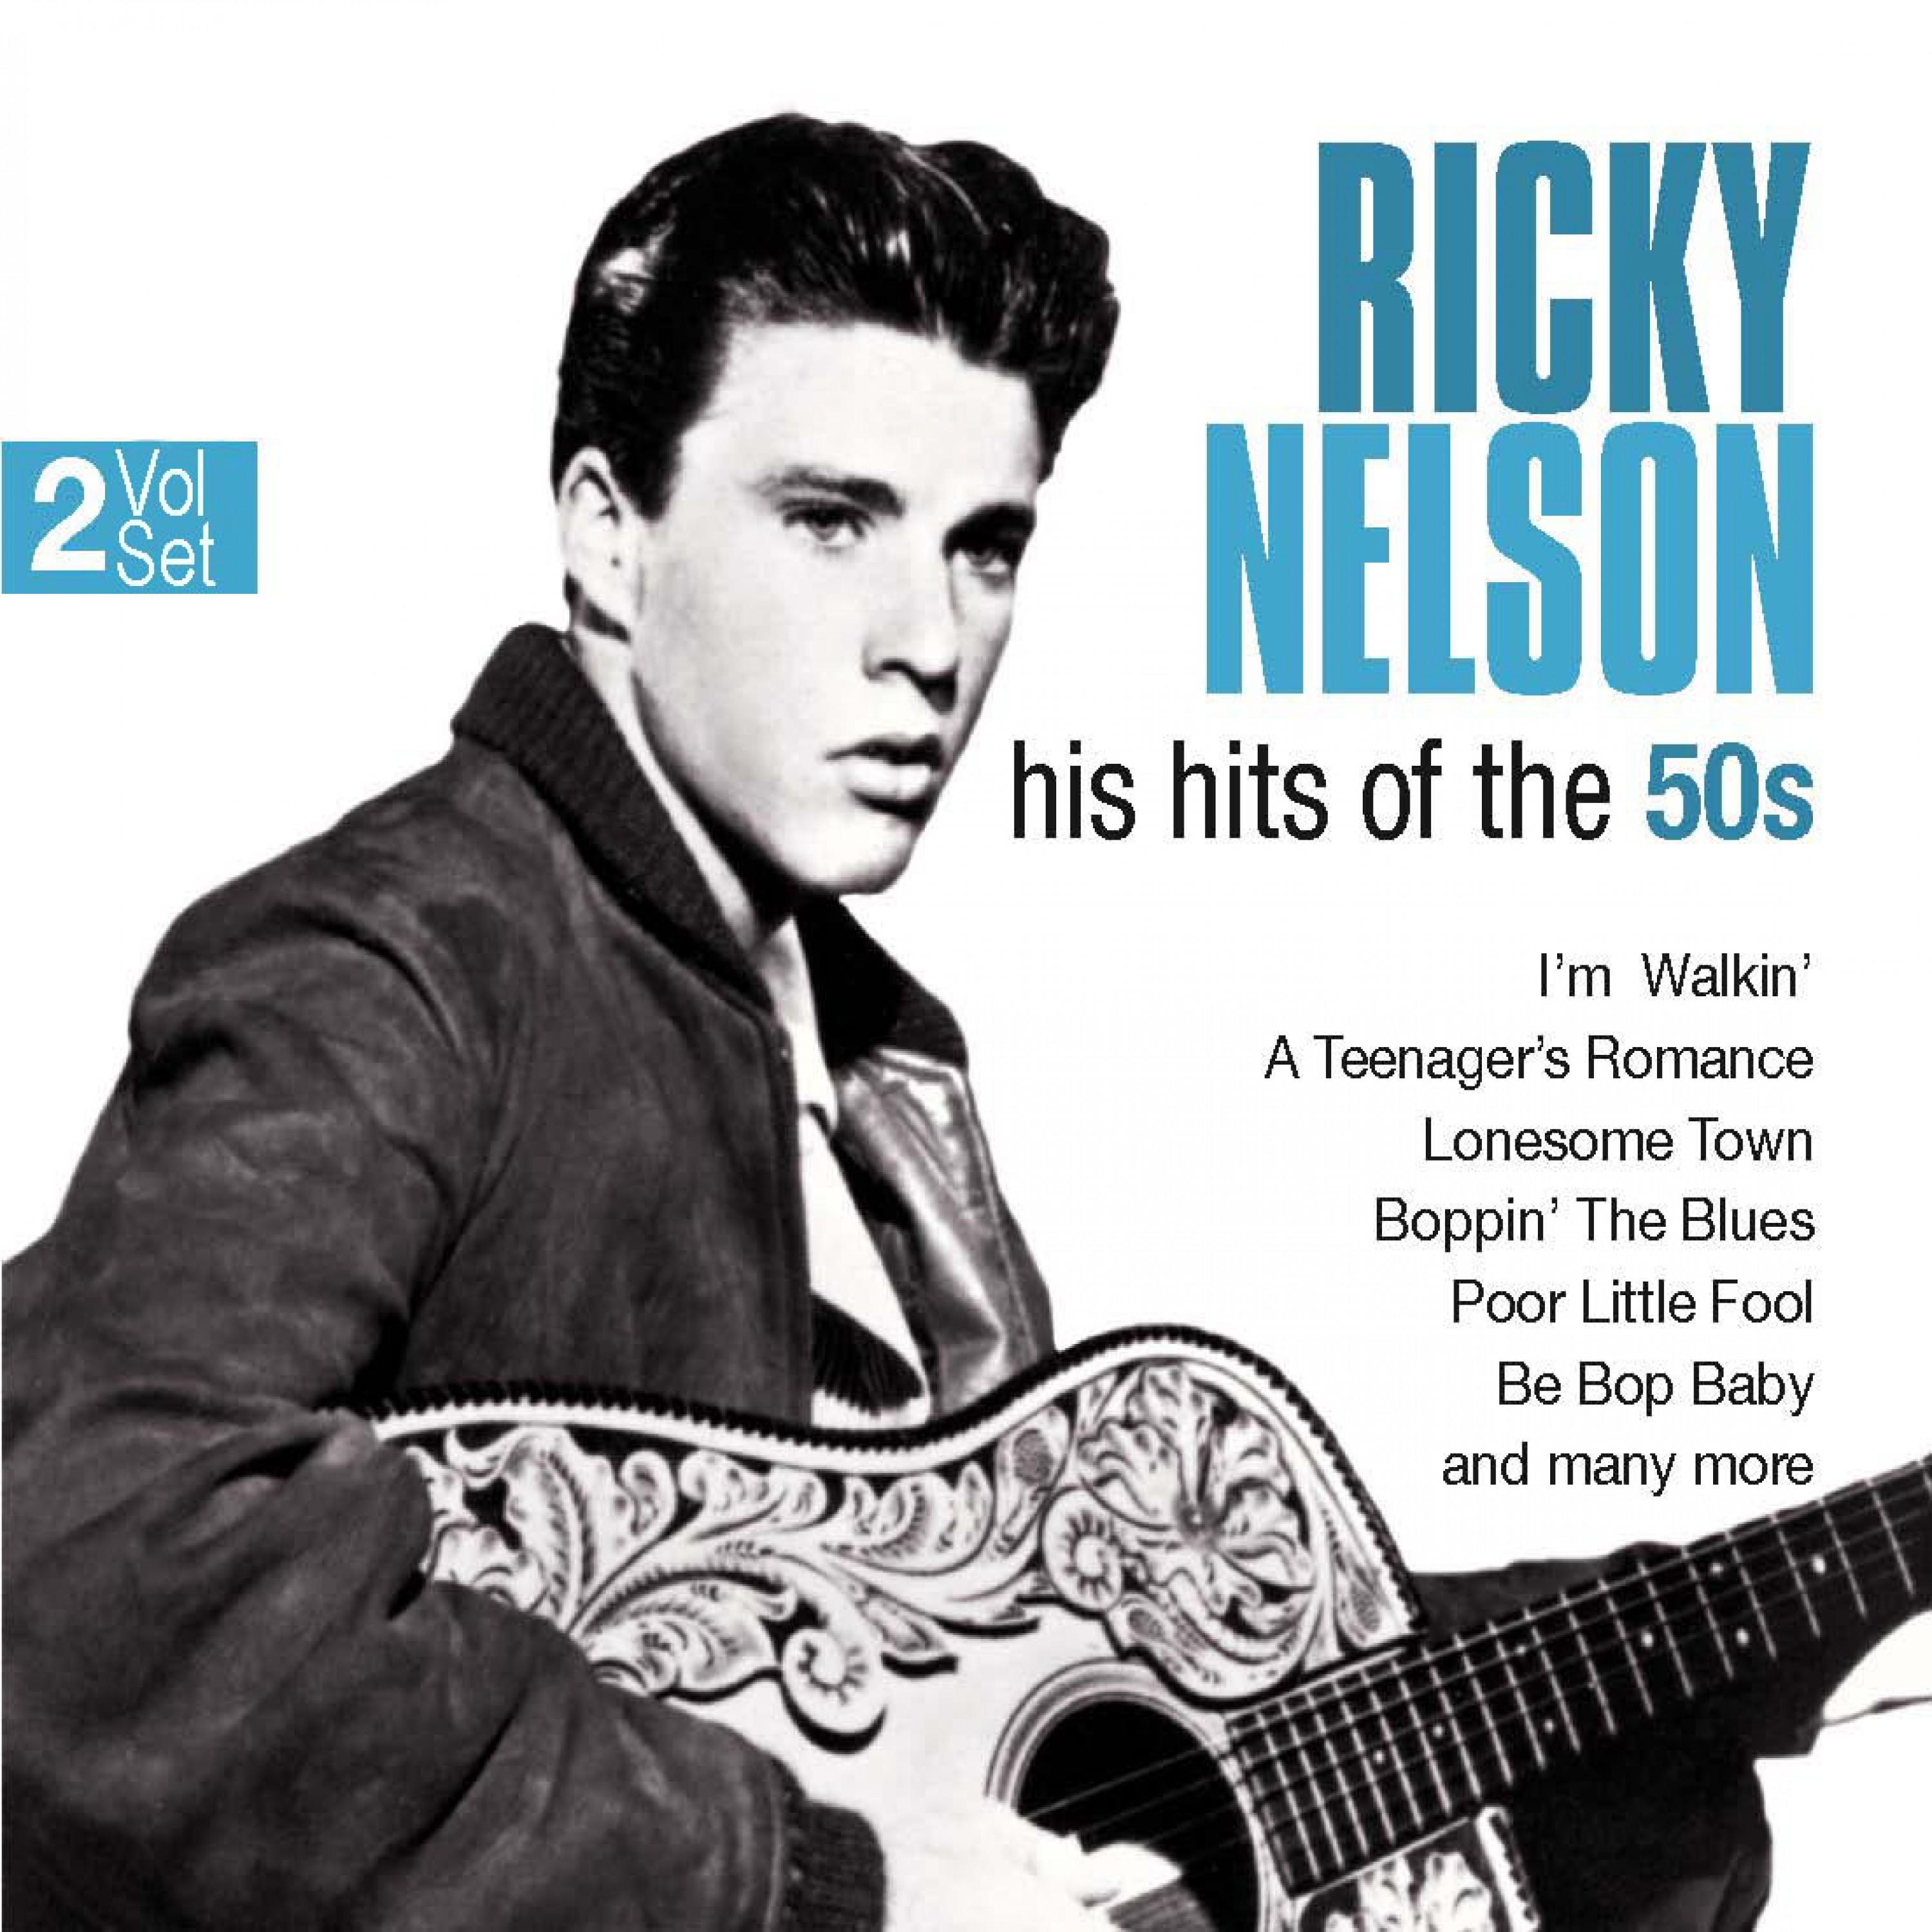 His Hits of the 50s